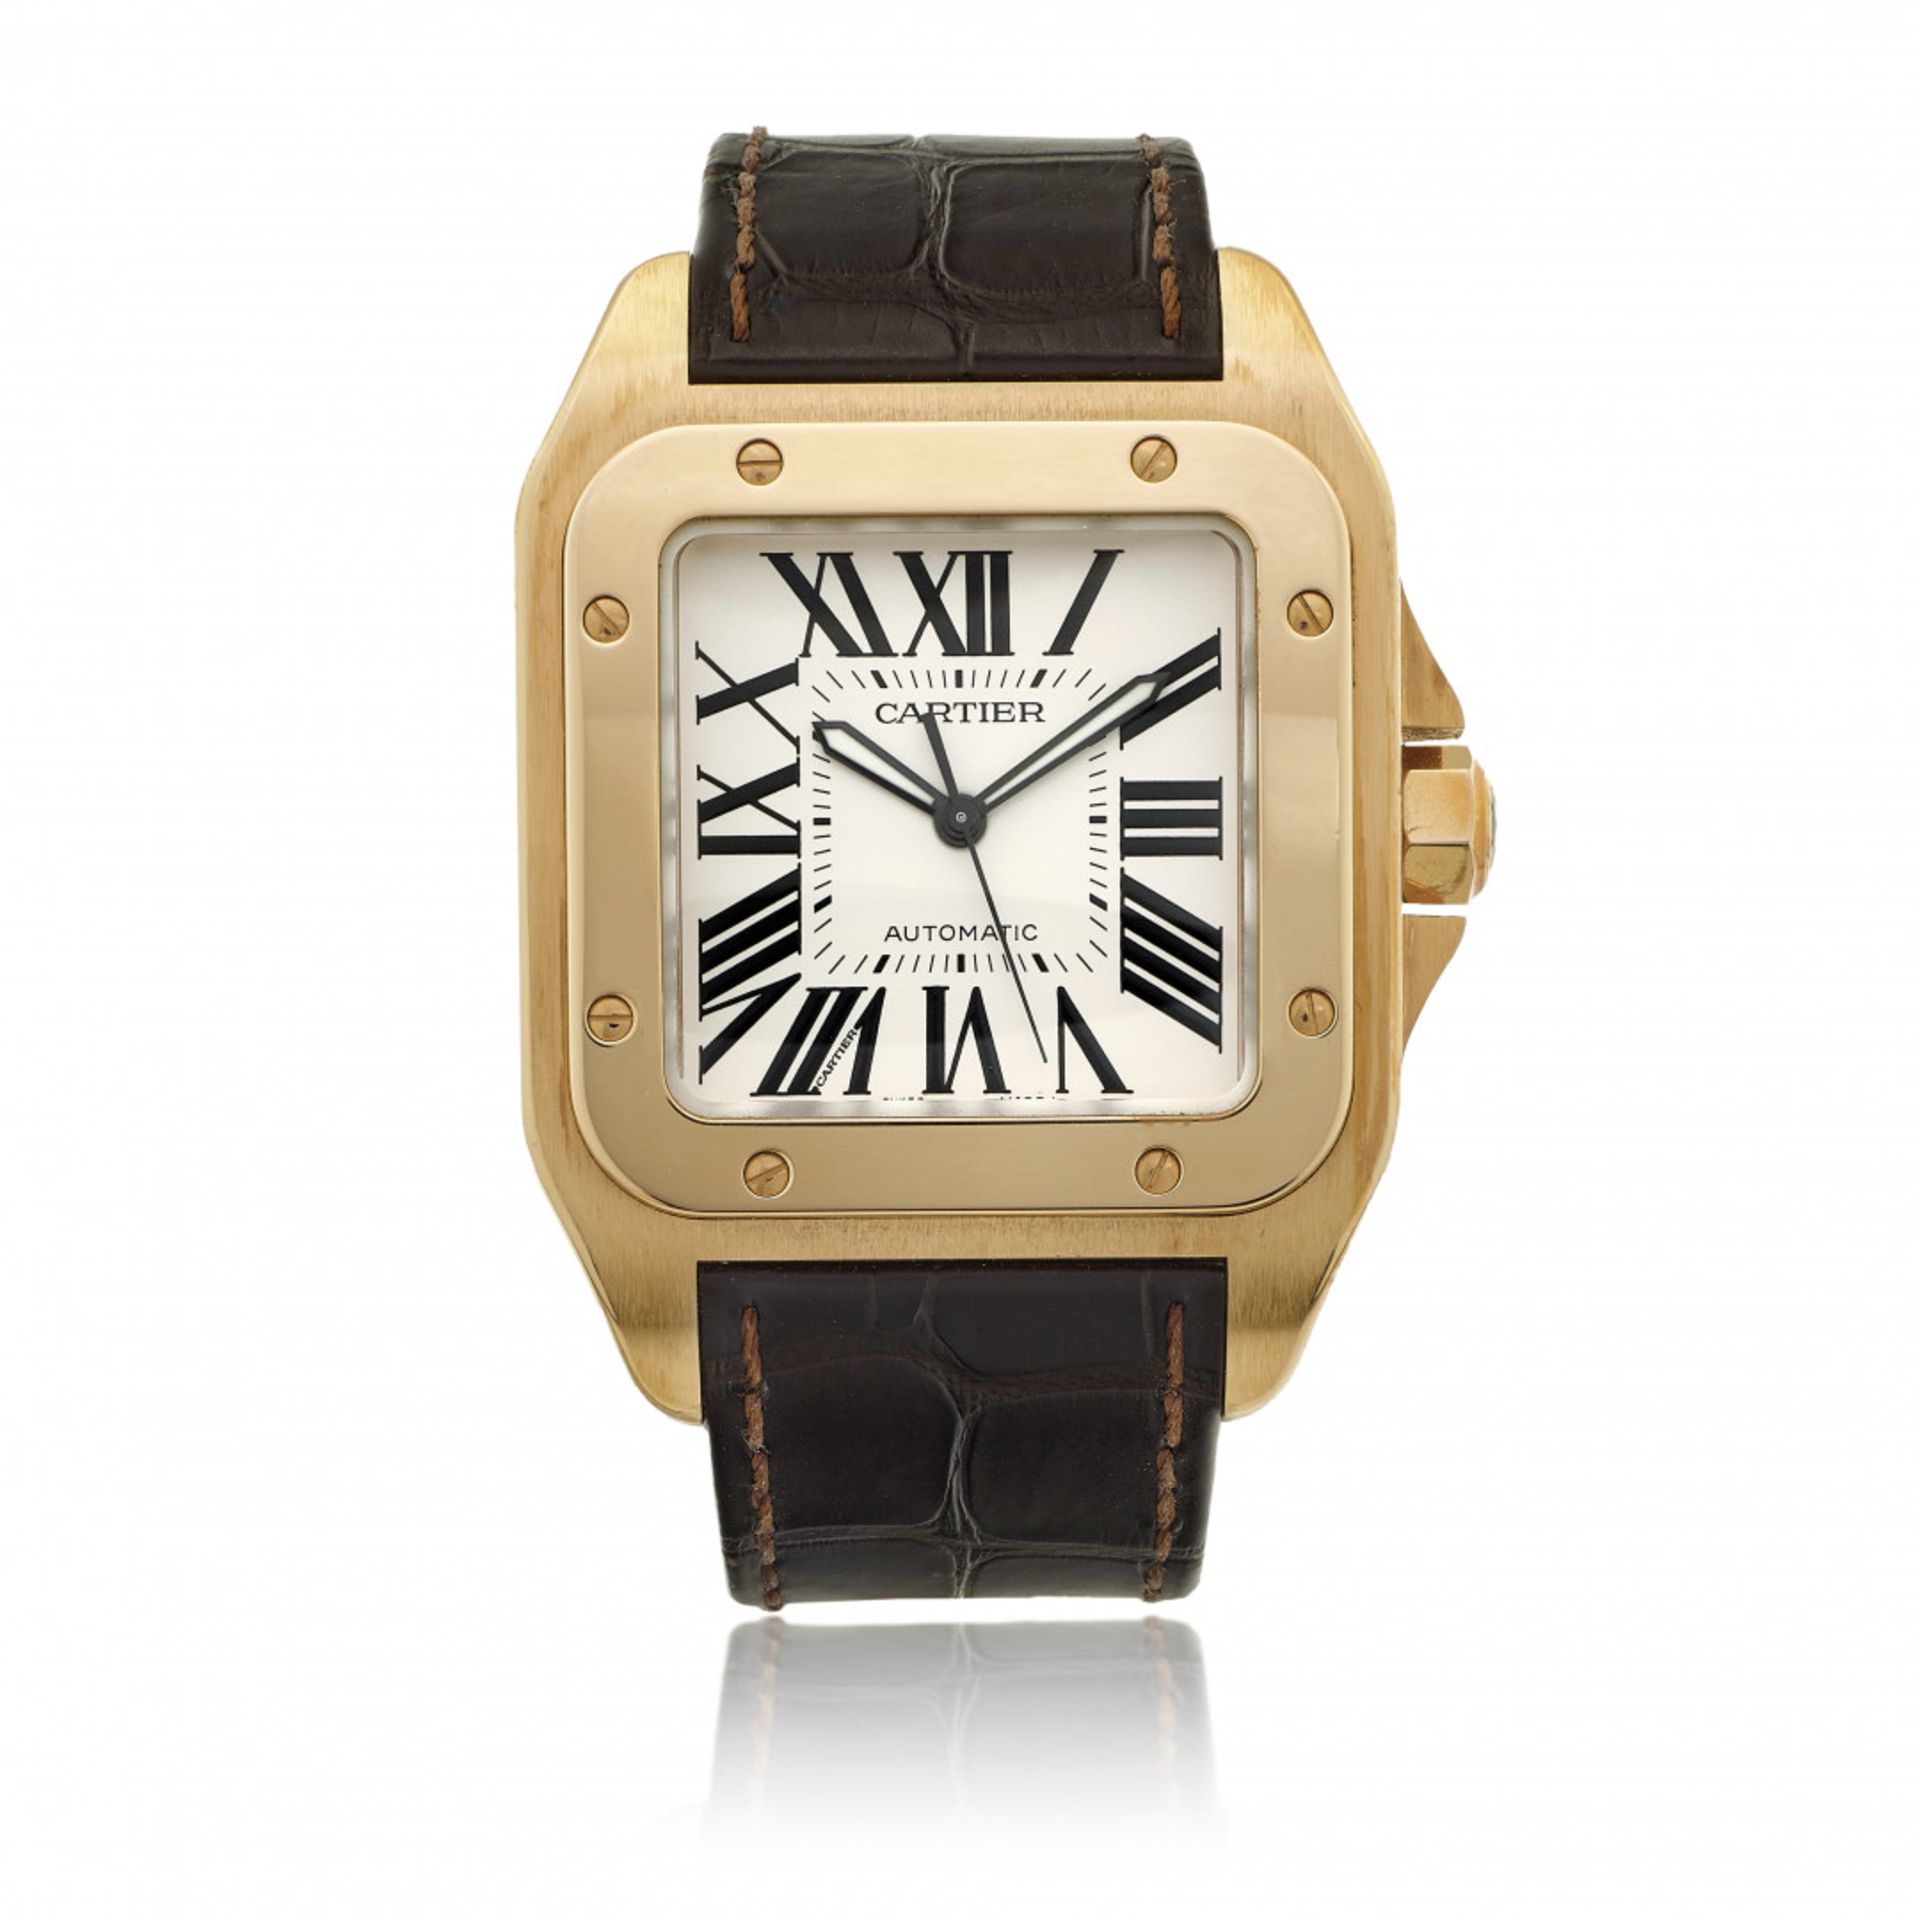 CARTIER SANTOS 100 XL REF. 2792 IN ROSE GOLD WITH BOX AND PAPERS, SOLD IN 2007